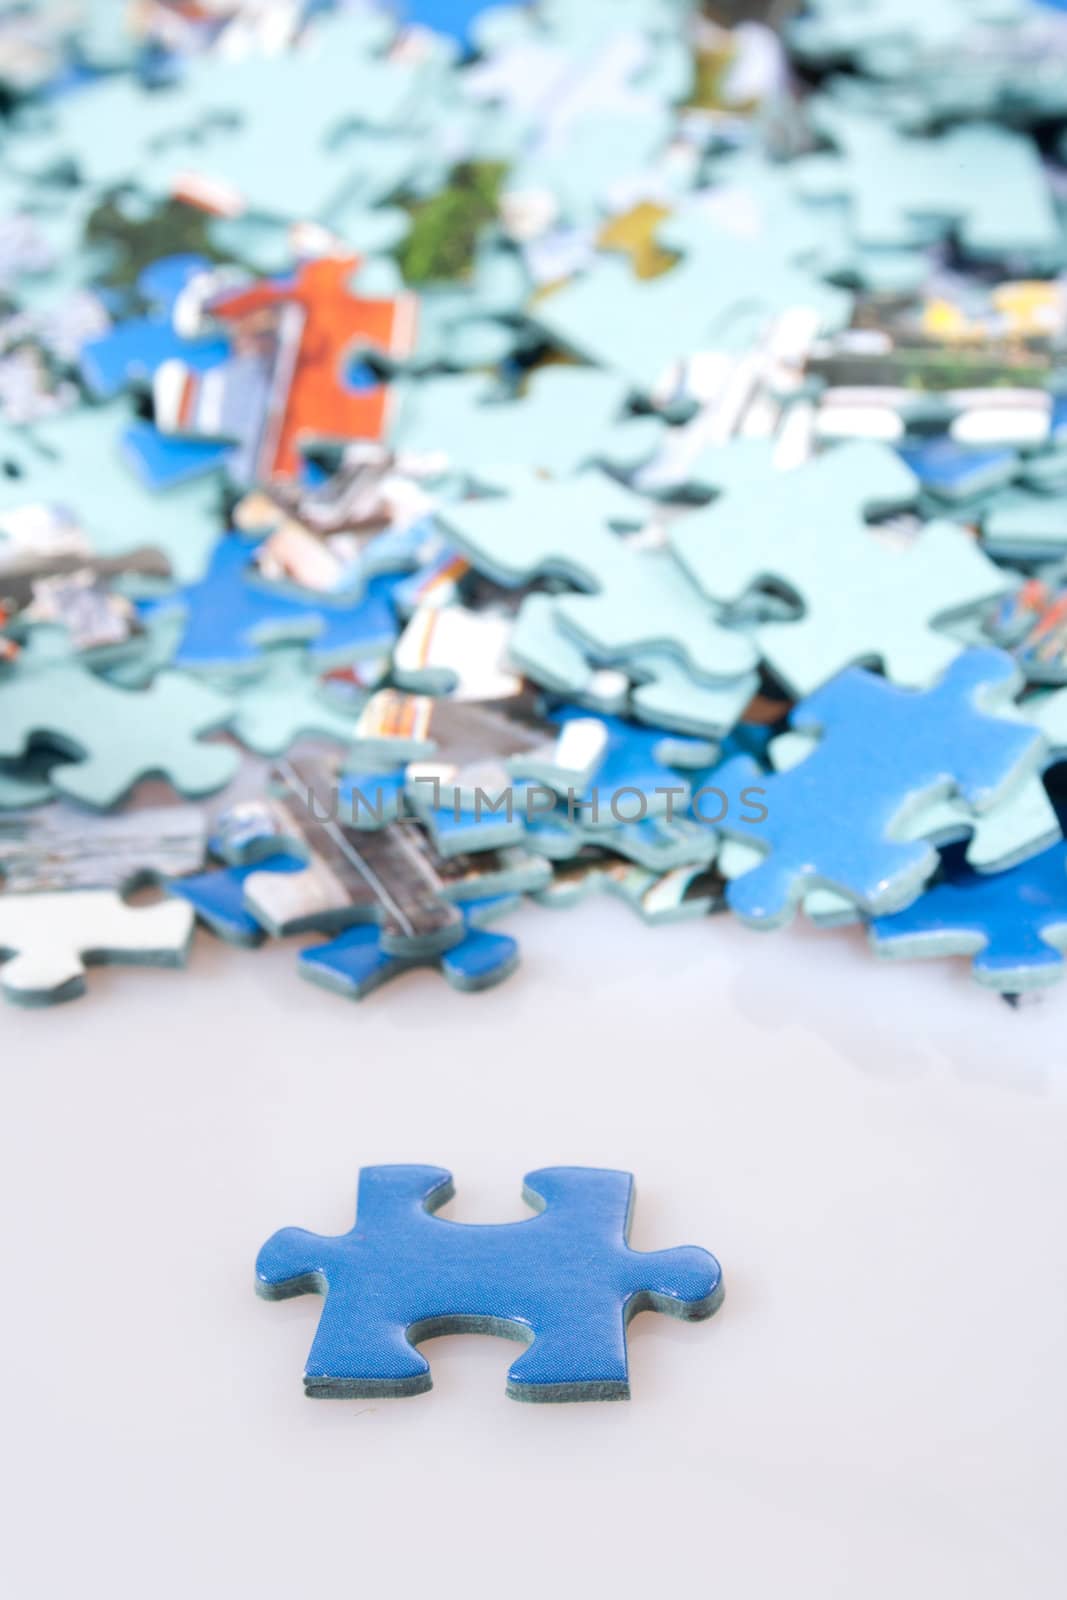 Pieces of puzzle spilled on table, abstract background 